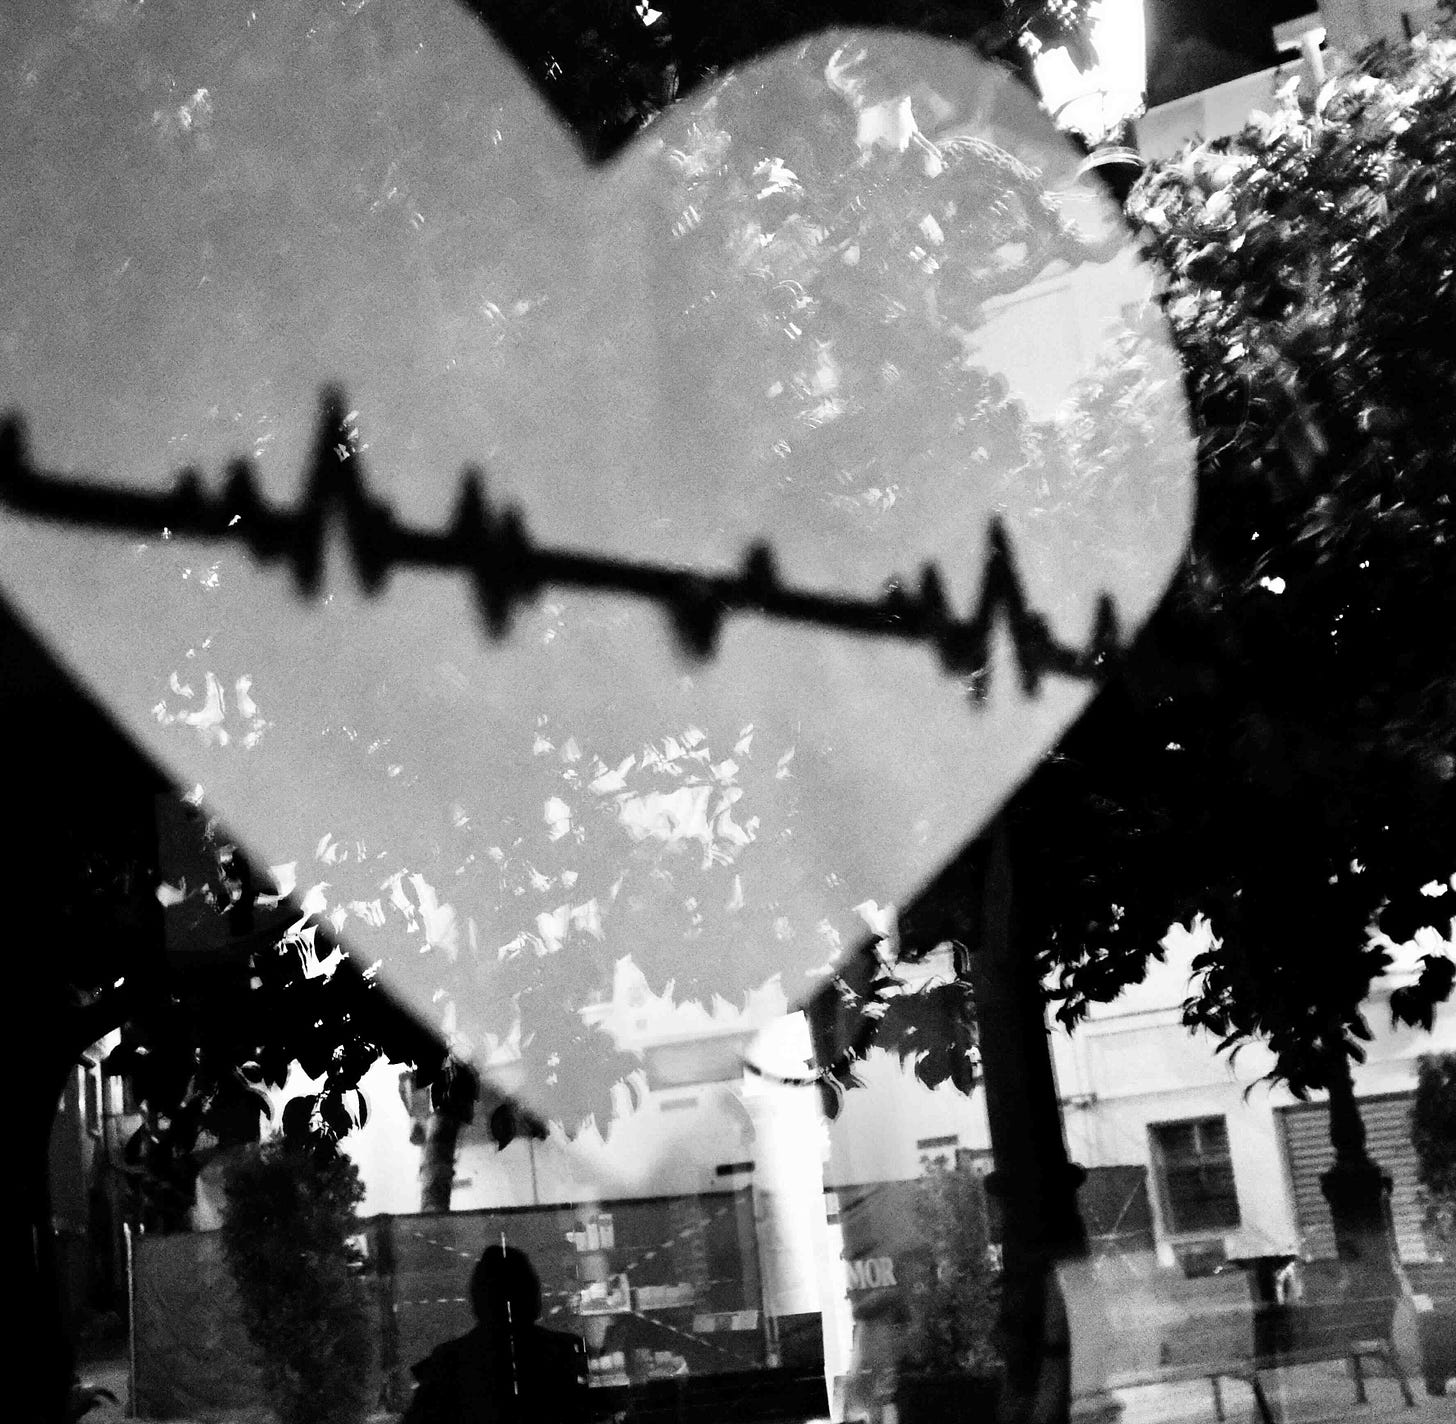 A black and white image of a large heart with a jagged line running through it. It is on a window which reflects a street scene and trees.